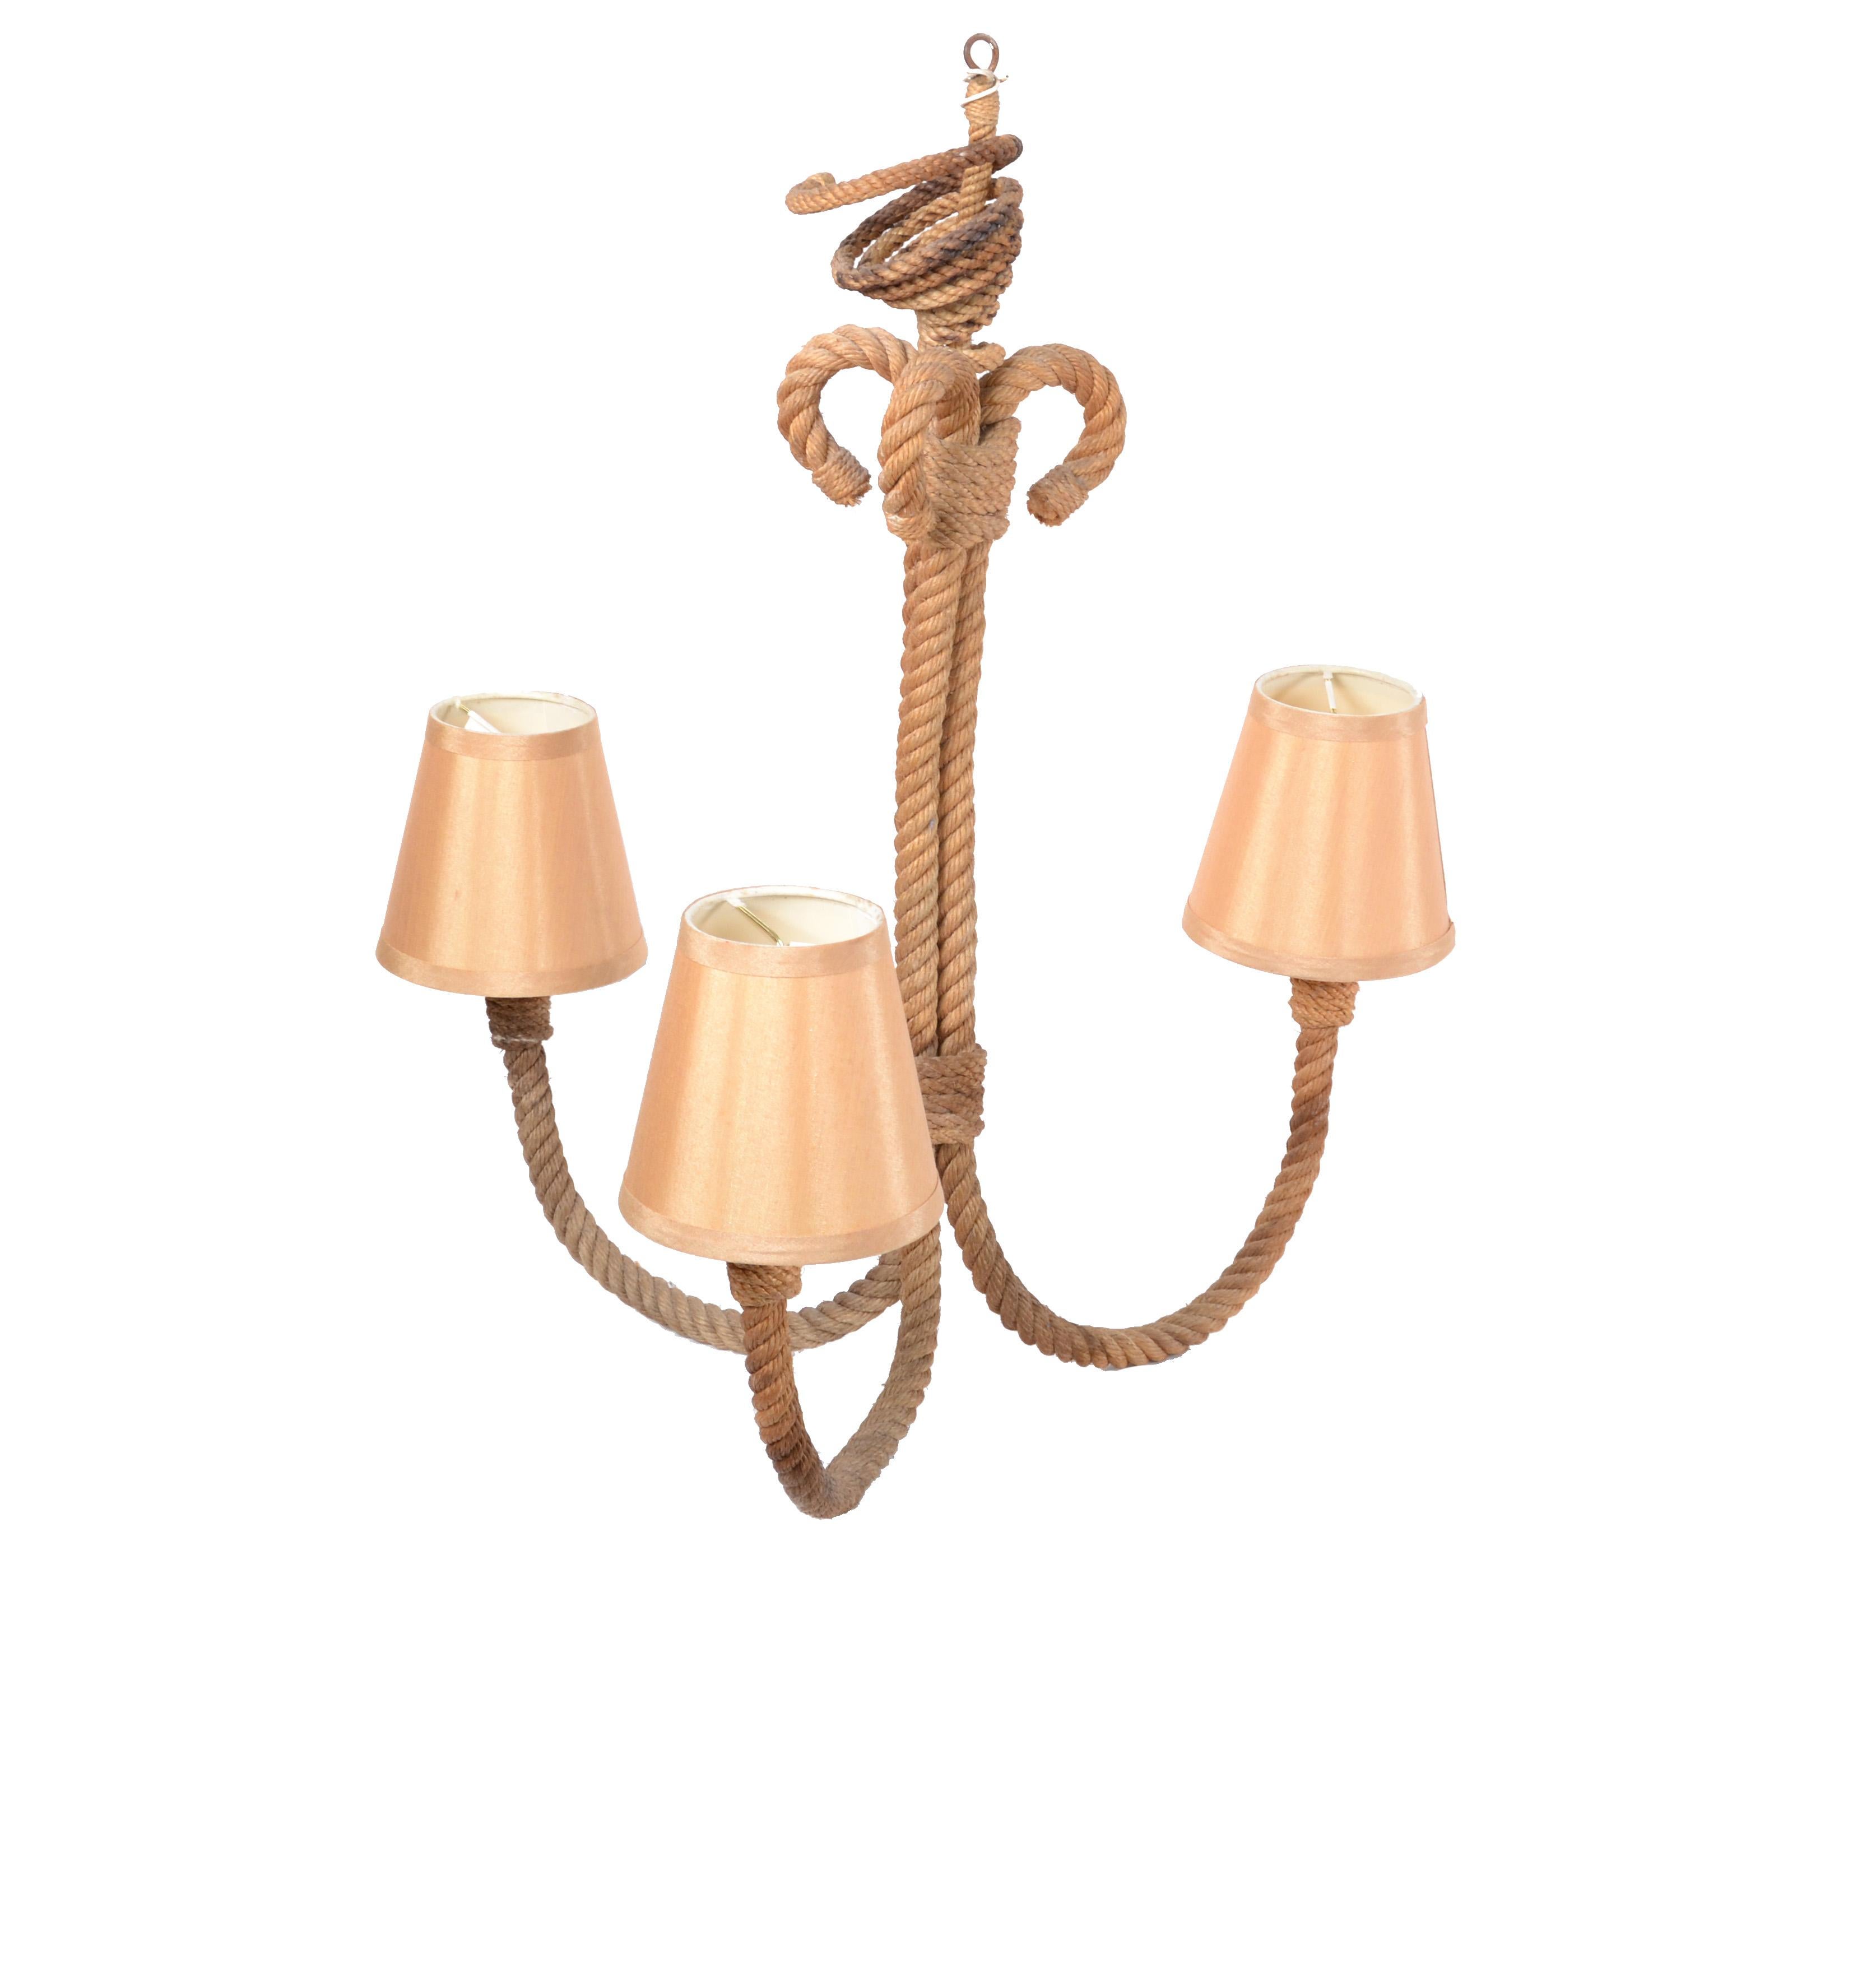 Mid-Century Modern Adrien Audoux and Frida Minet 3-light French rope chandelier.
Nautical design made in the 1960s.
Takes 3-light bulbs with max. 40 watts.